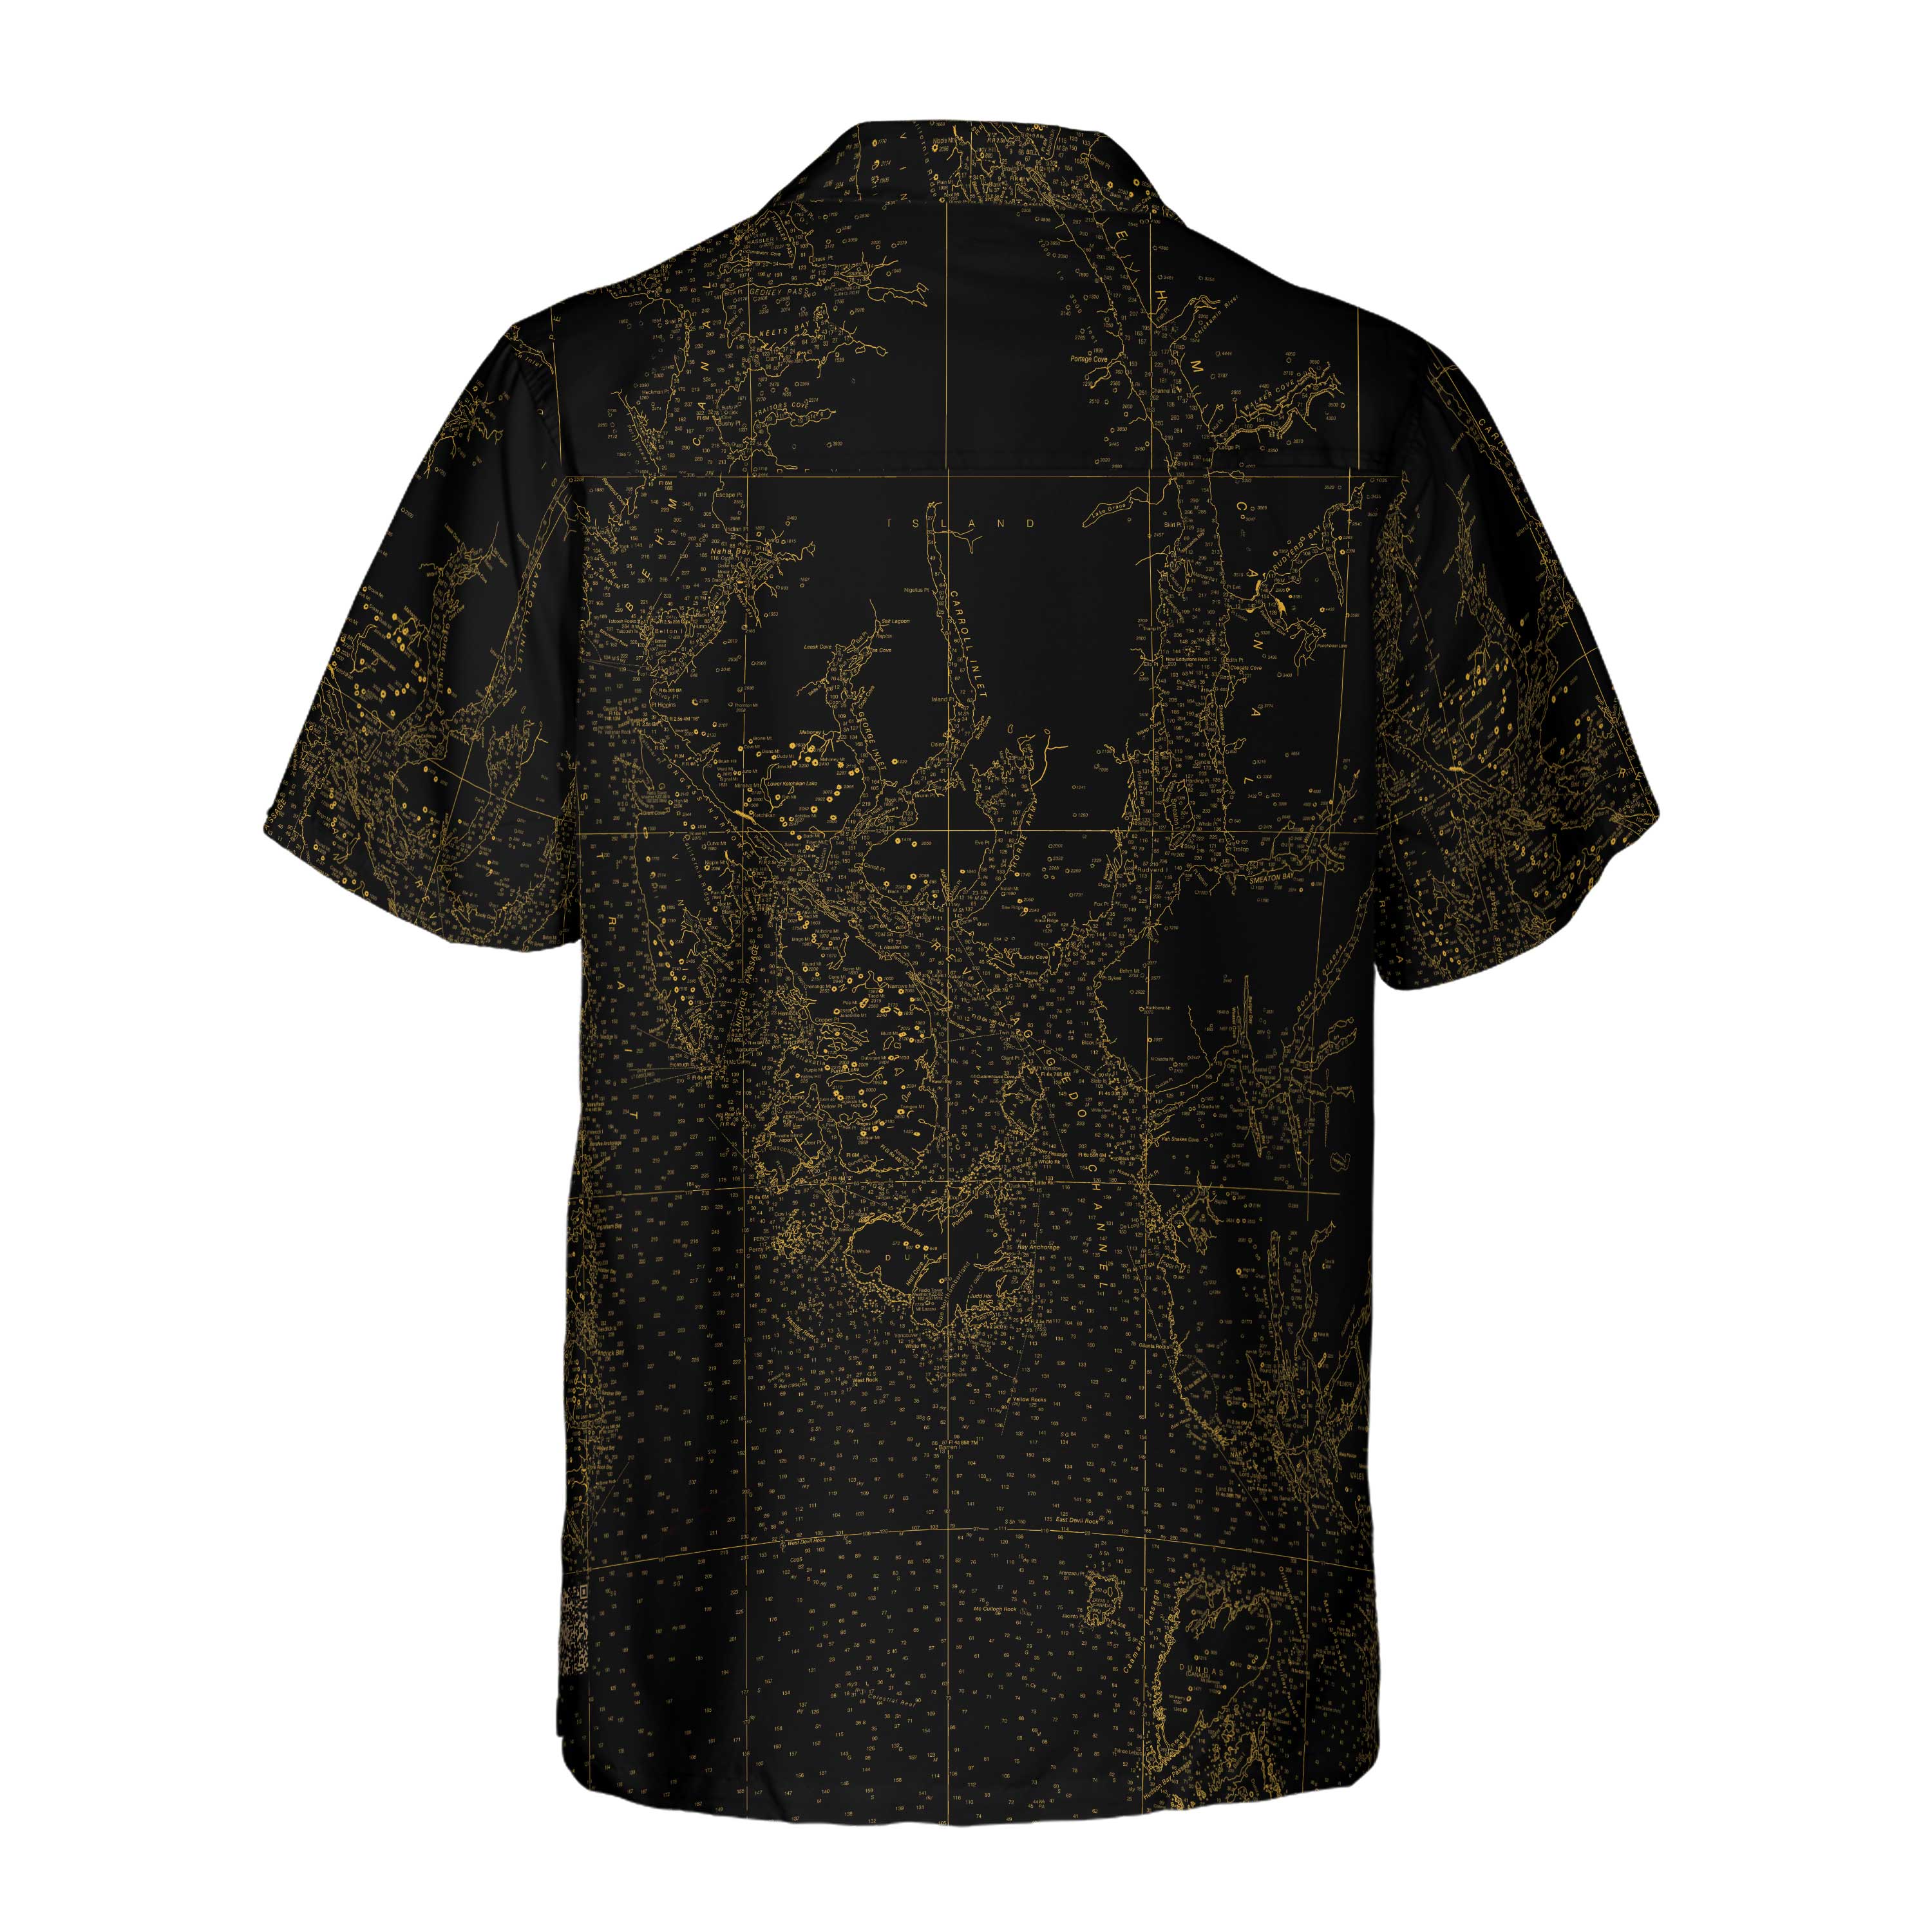 The CAC Midnight Gold Coconut Button Camp Shirt